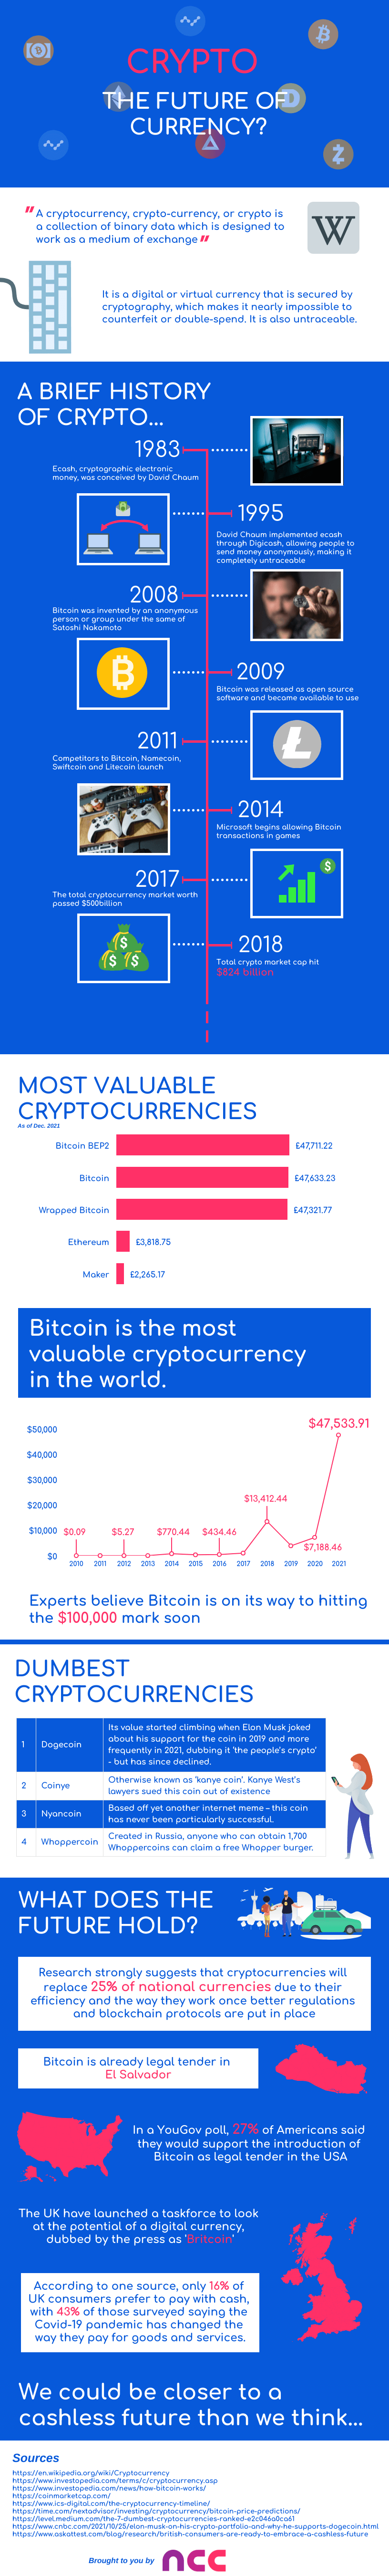 Crypto - the future of currency